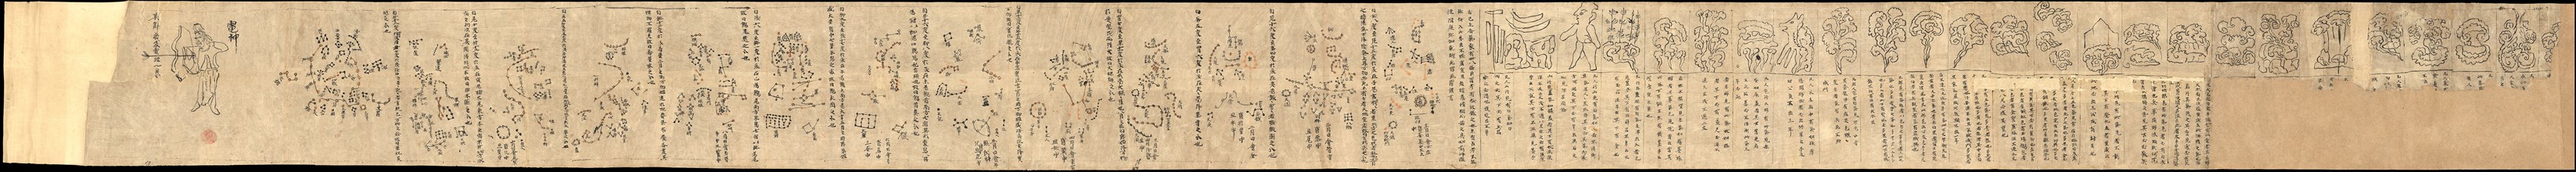 The Dunhuang Star map, ca 700. Artist: Anonymous master